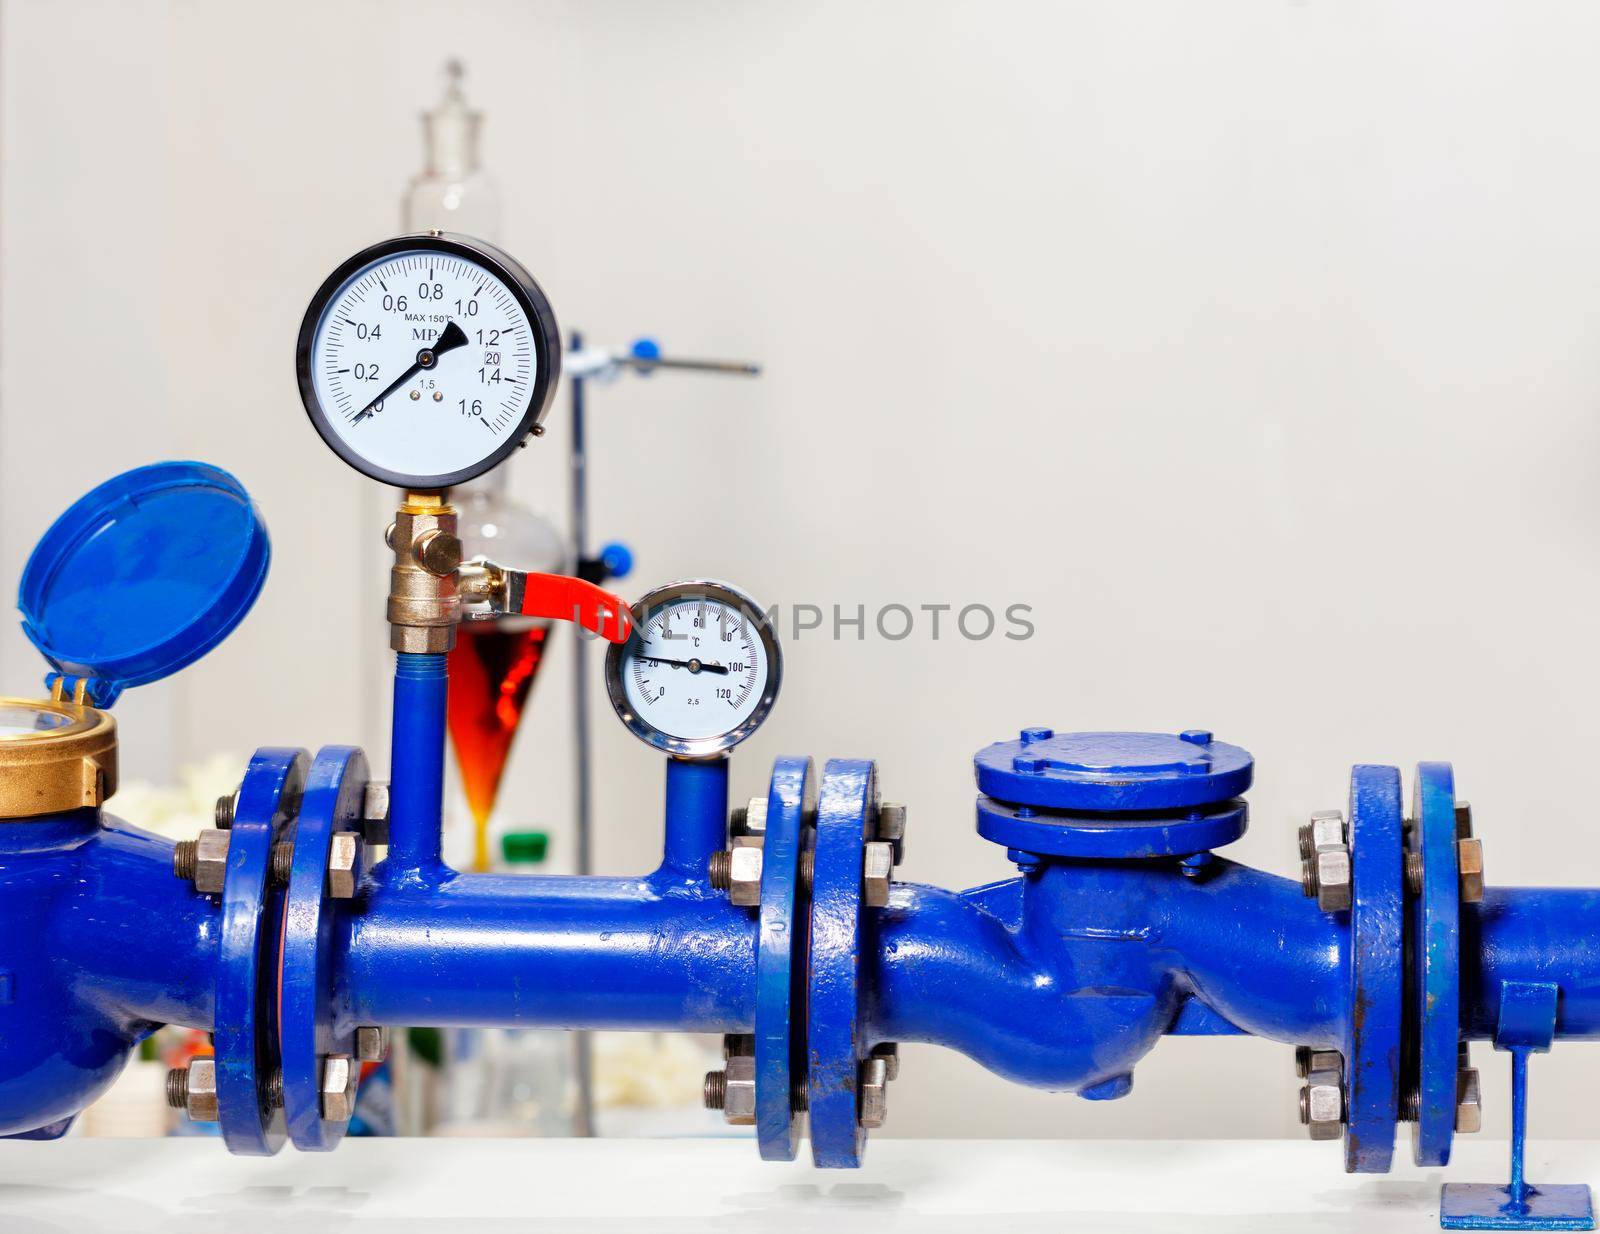 Installation of water measurement and pressure systems, close-up of pressure gauges, pipes and taps, control and accounting concept, copy space.